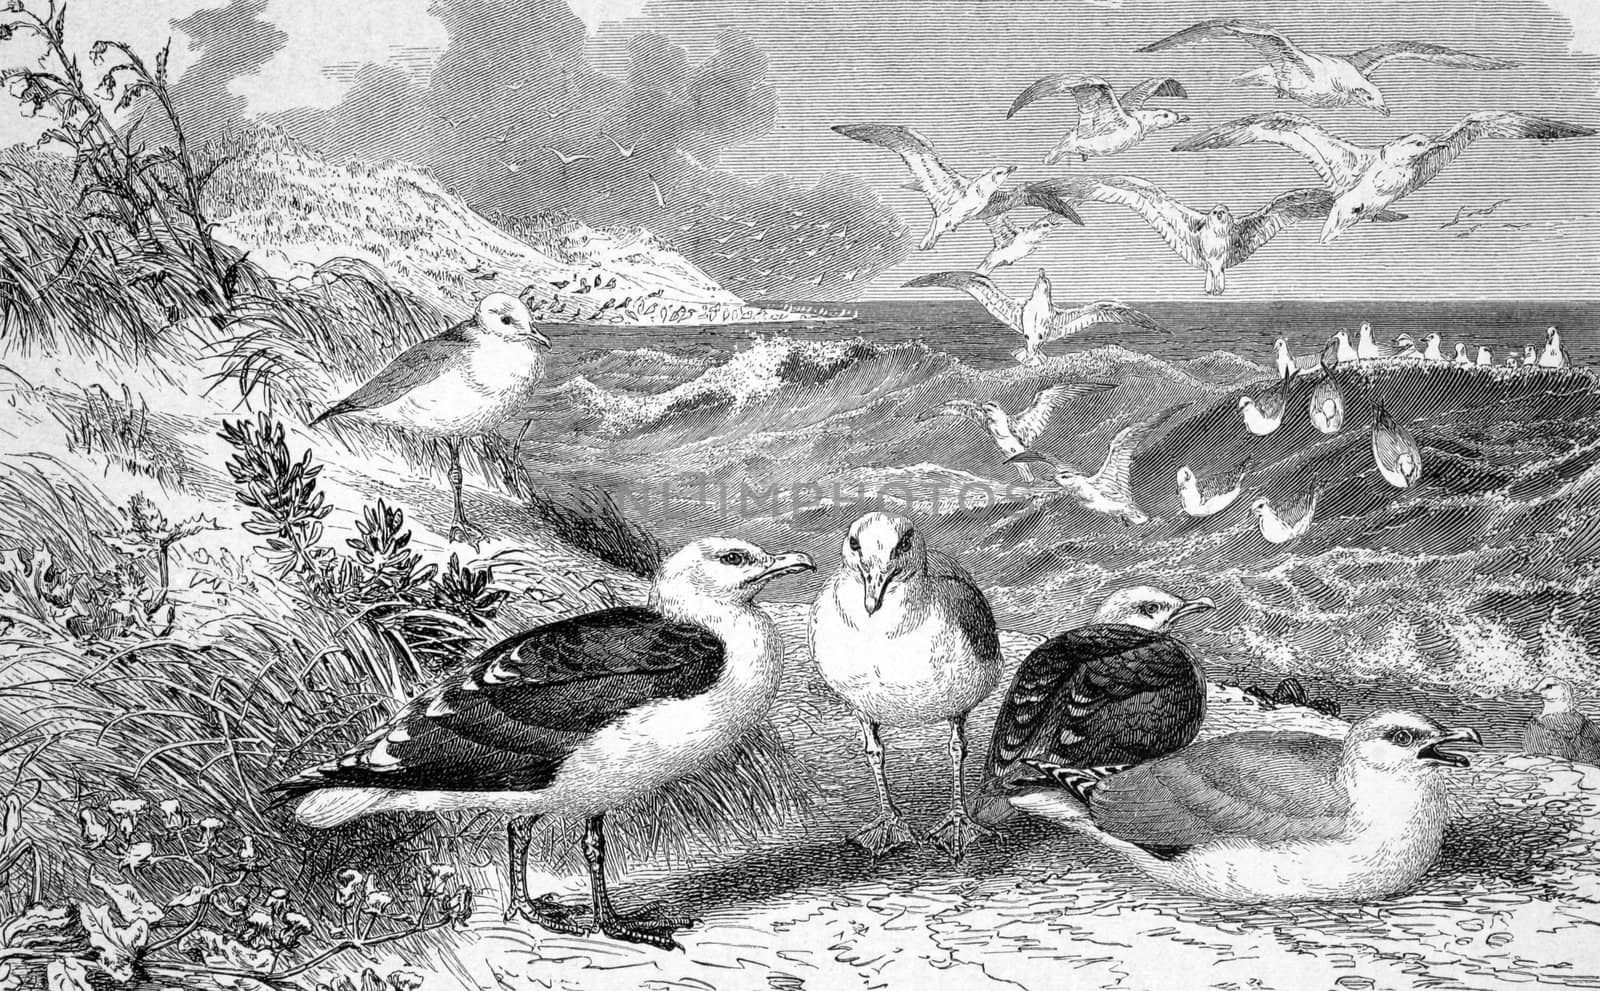 Seagulls on engraving from 1890. Engraved by unknown artist and published in Meyers Konversations-Lexikon, Germany,1890.